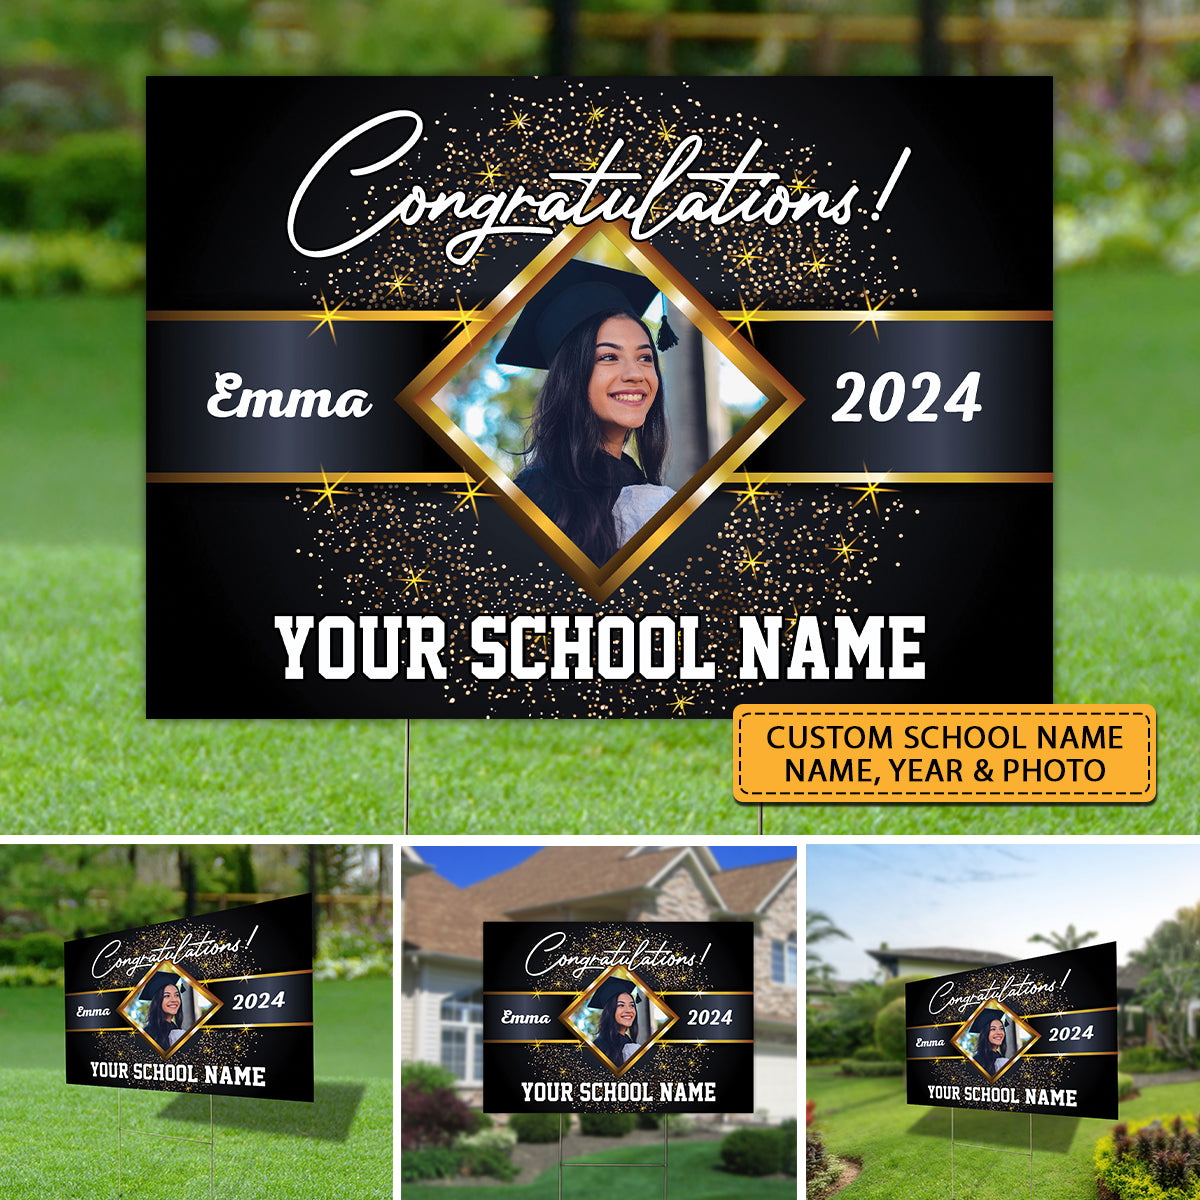 Congratulations, Custom School Name, Your Name, Year And Photo, Personalized Lawn Sign, Yard Sign, Gift For Graduation